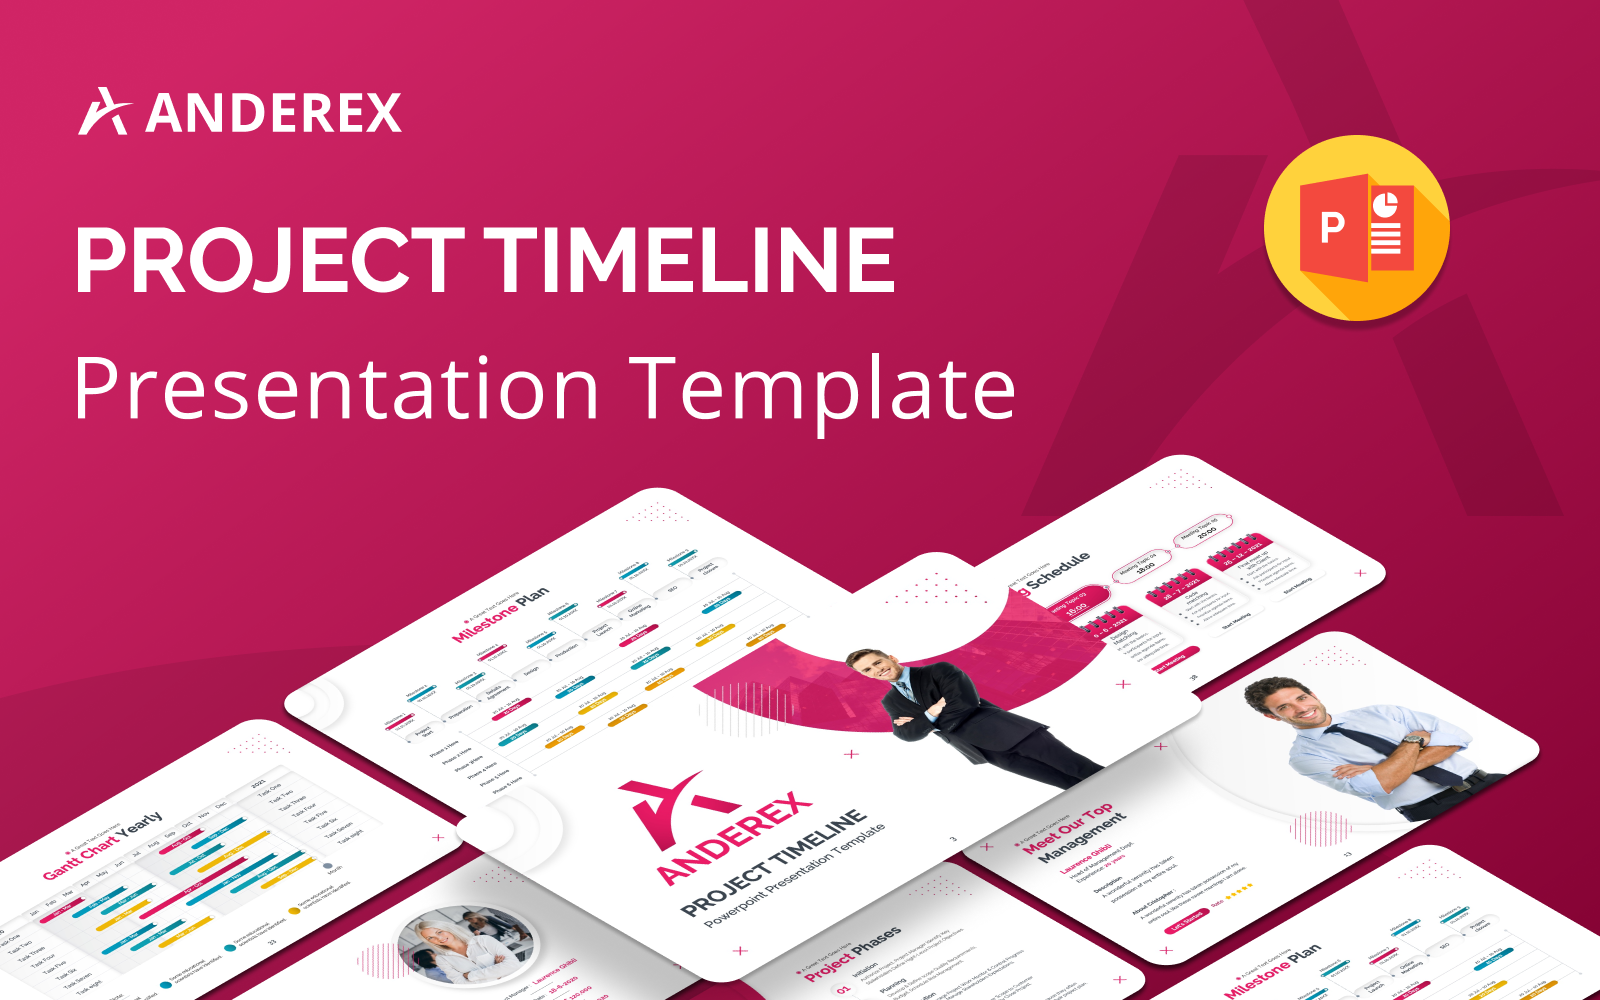 Anderex – Project Timeline PowerPoint Presentation Template